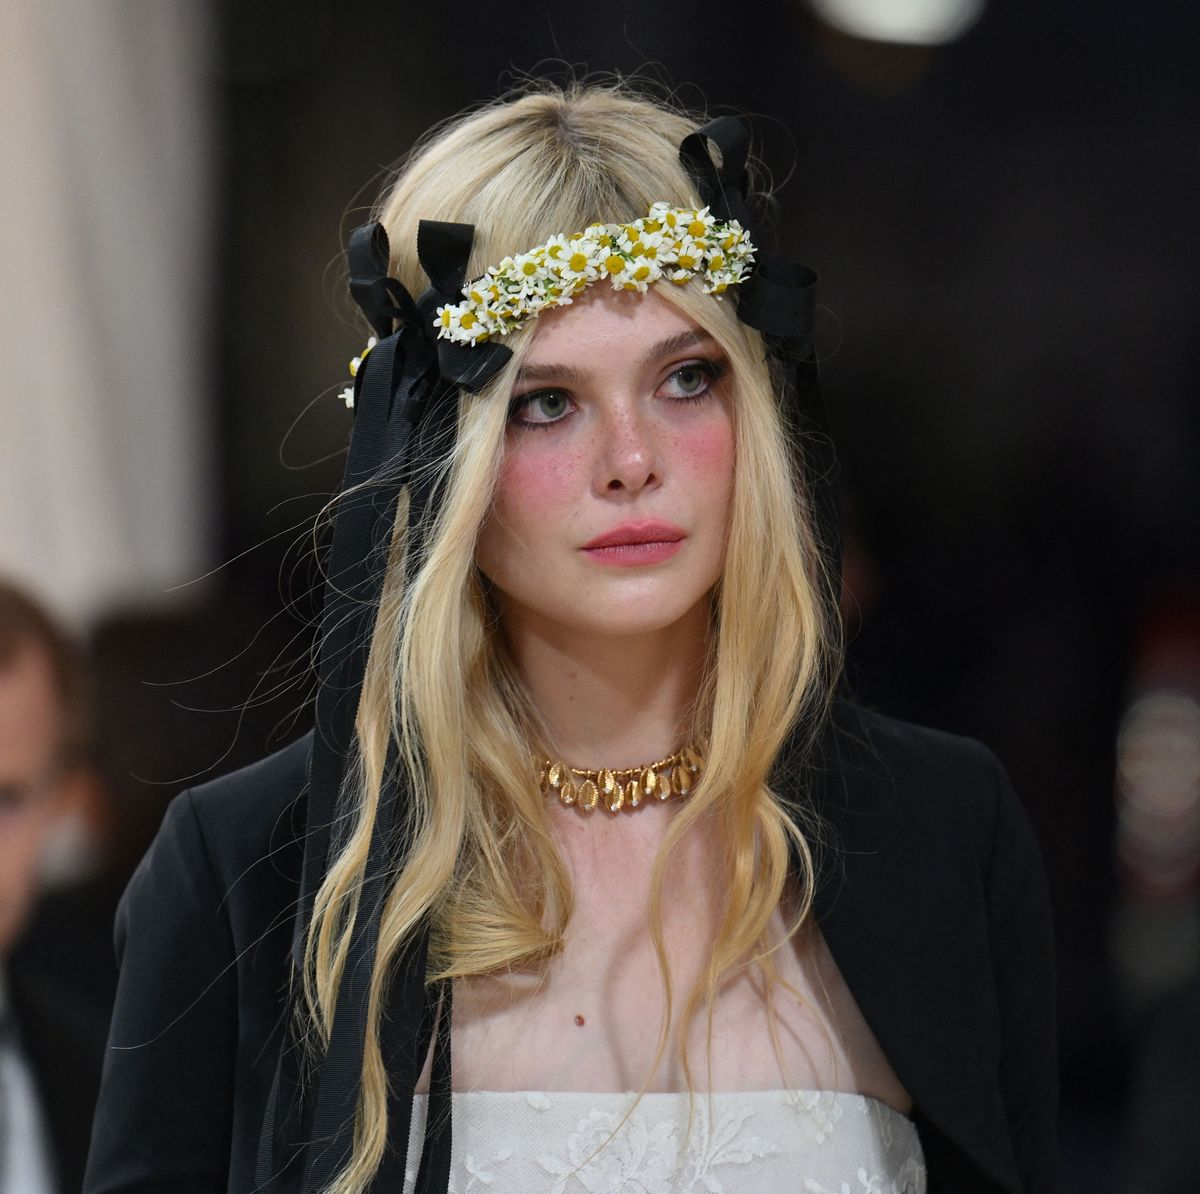 Elle Fanning Says She Lost Role to Actress With More Instagram Followers